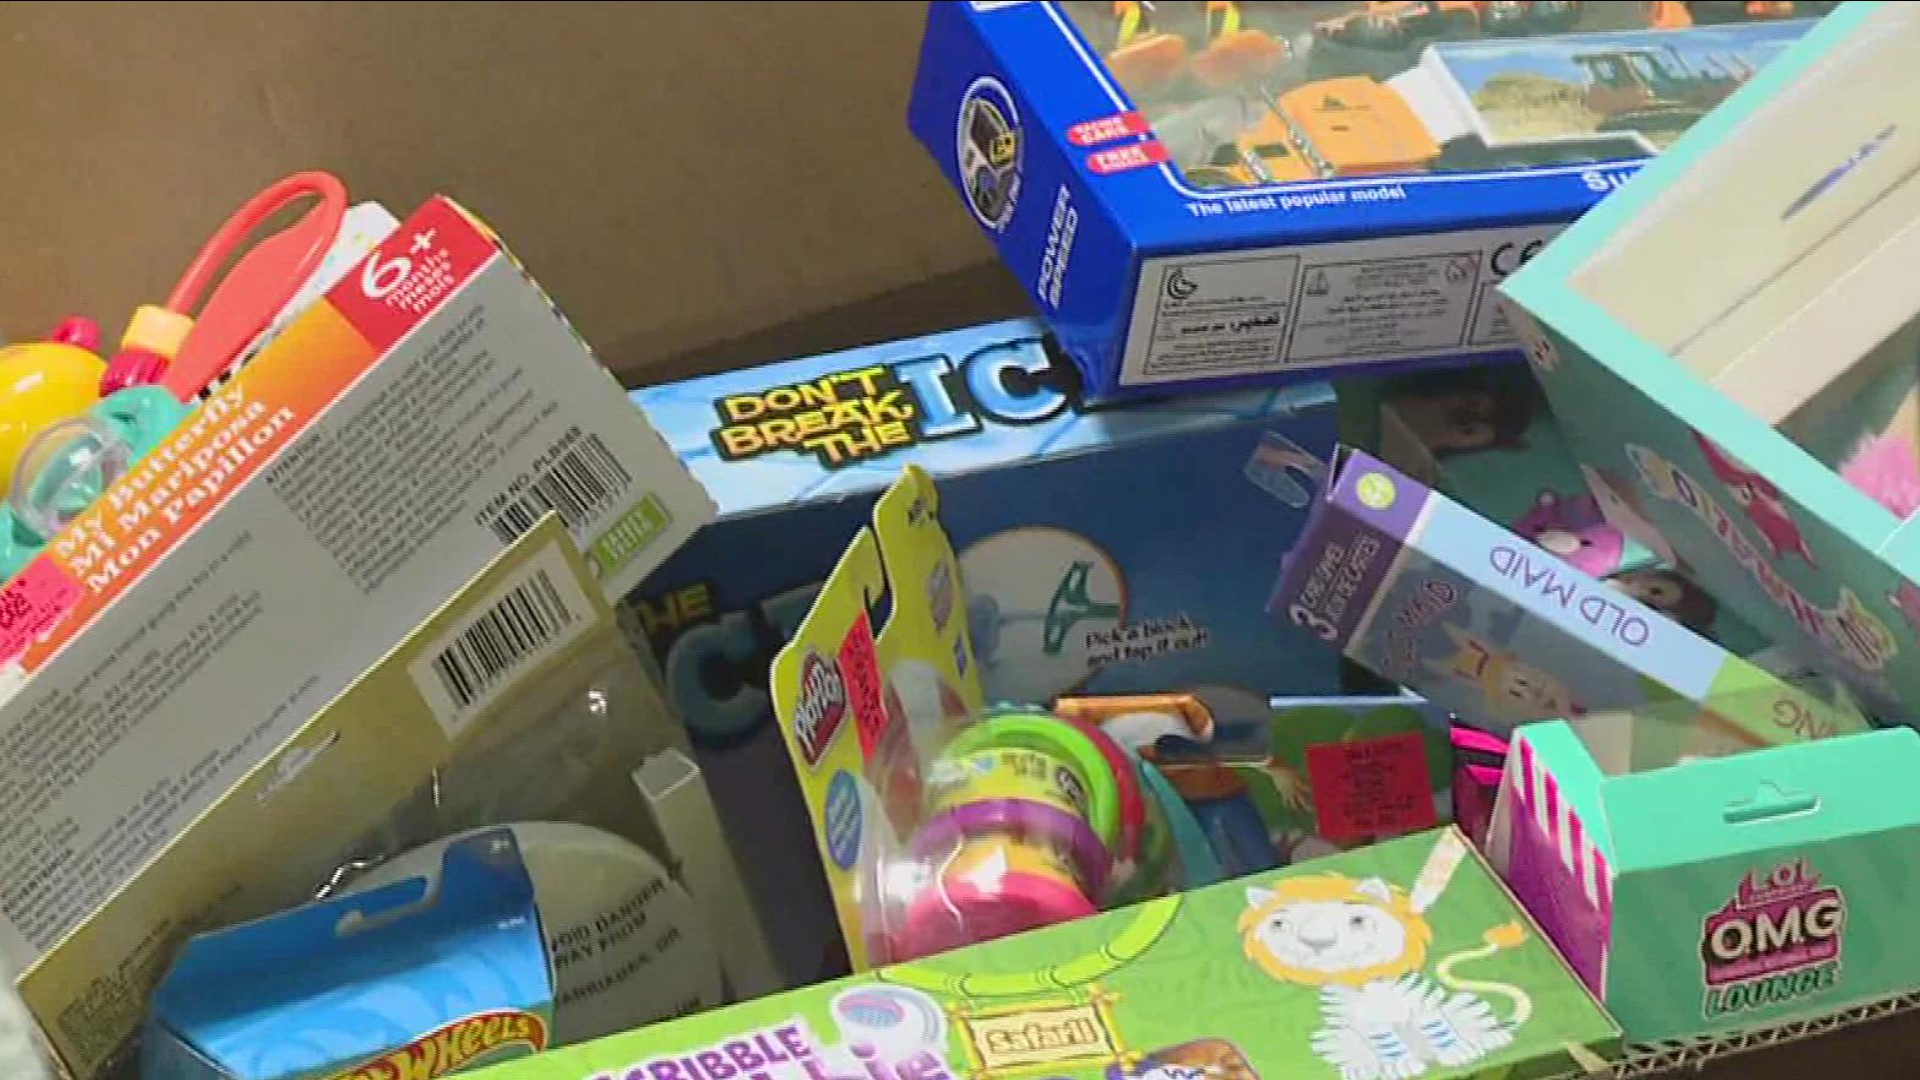 A community effort made sure the children staying at a women's shelter in Columbia County had a merry Christmas. Newswatch 16's Elizabeth Worthington shows us how.